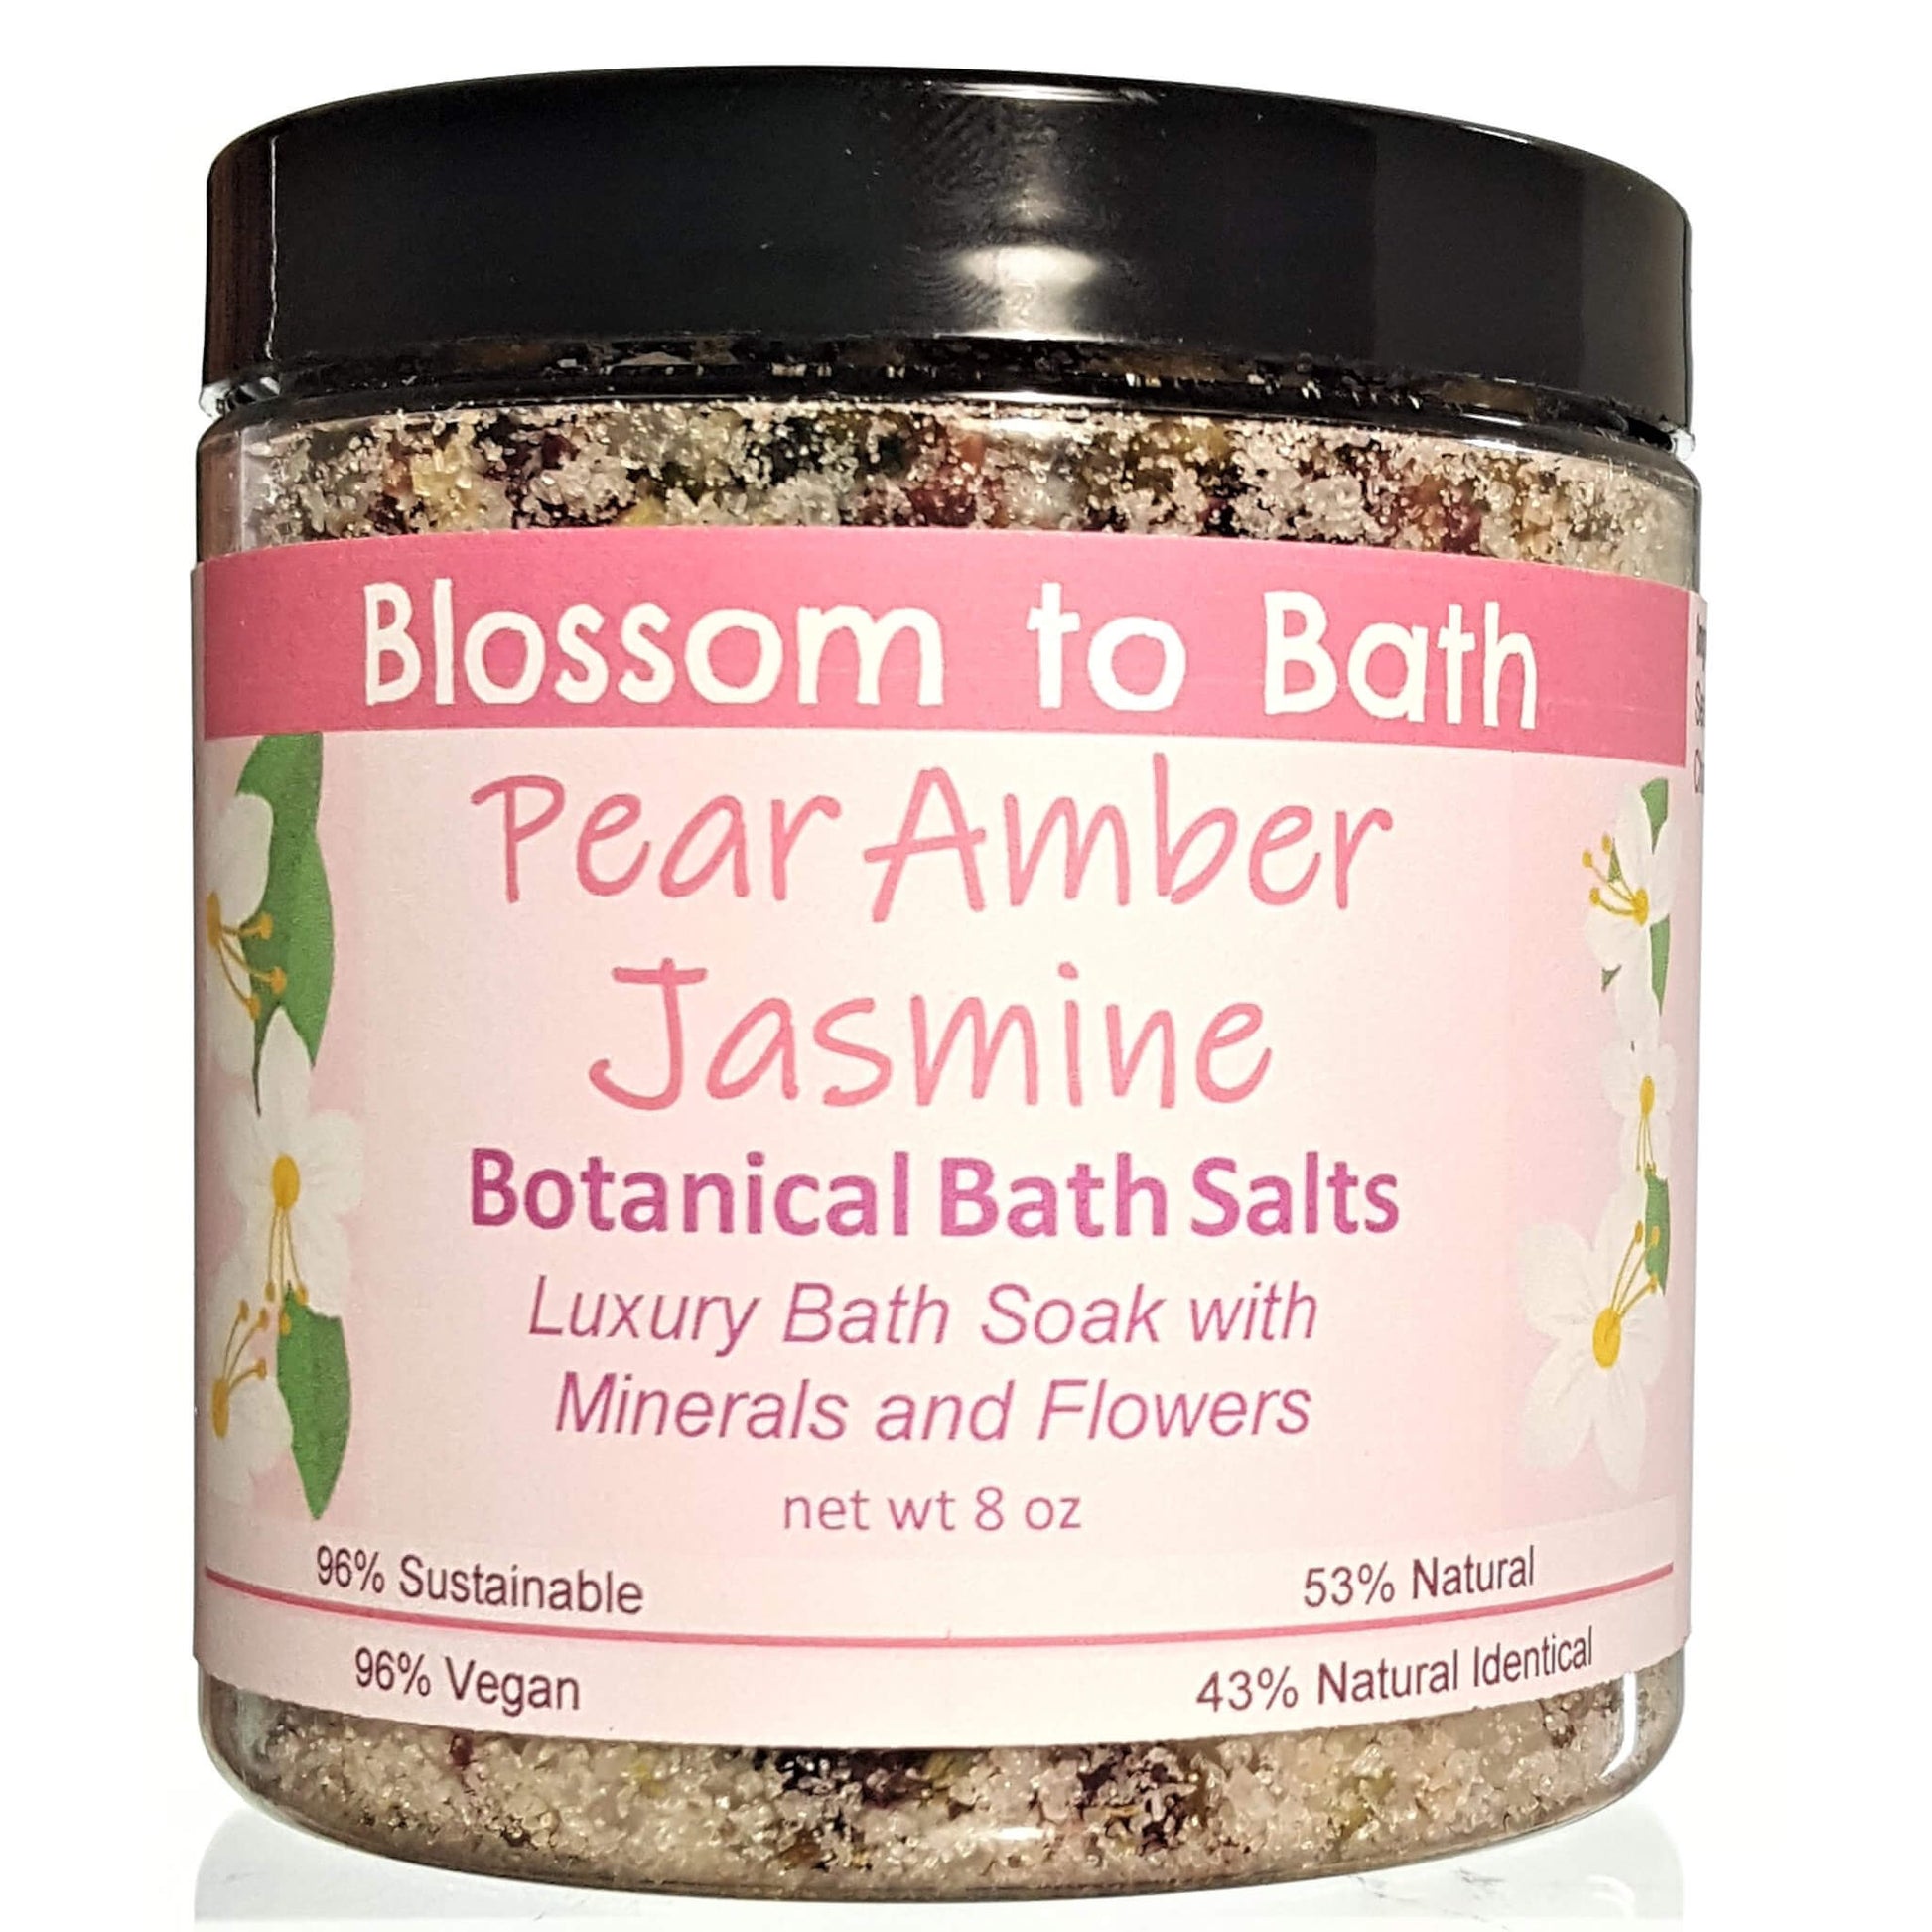 Buy Blossom to Bath Pear Amber Jasmine Botanical Bath Salts from Flowersong Soap Studio.  A hand selected variety of skin loving botanicals and mineral rich salts for a unique, luxurious soaking experience  A scent that lets you escape to an island paradise of pear, jasmine, and warm spices.